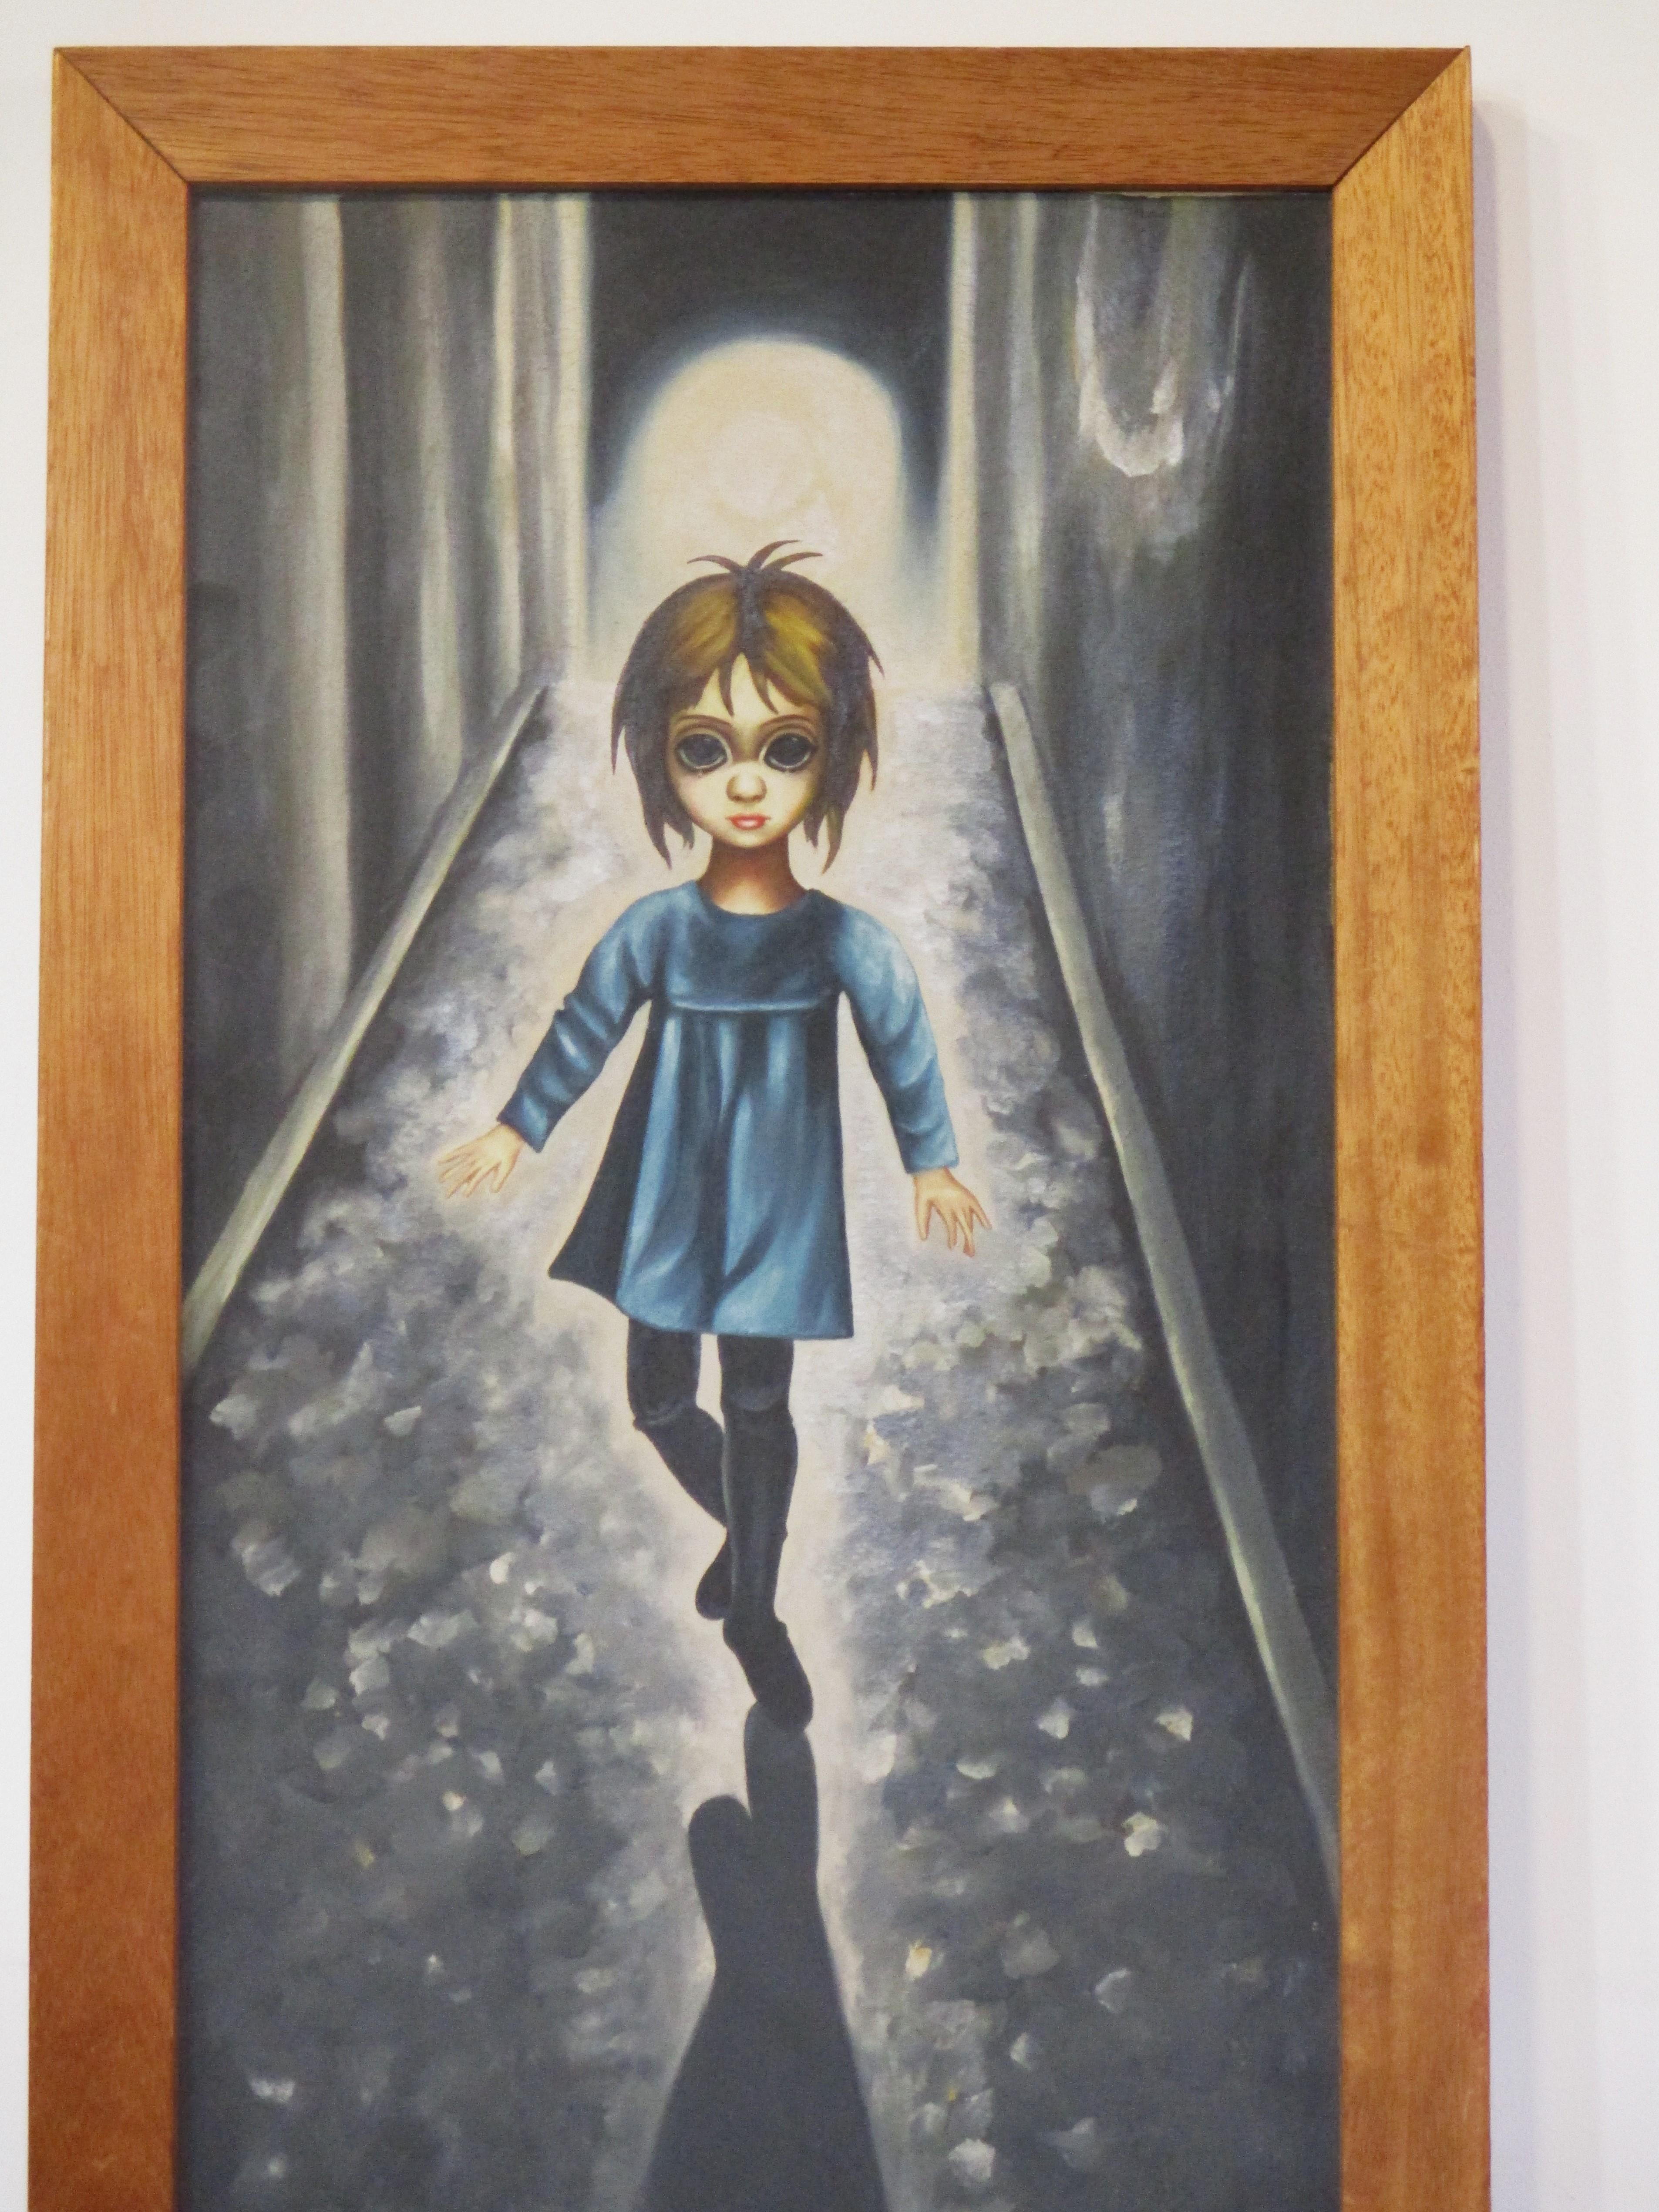 A very well done medium sized painting on canvas with a small girl having big eyes titled 